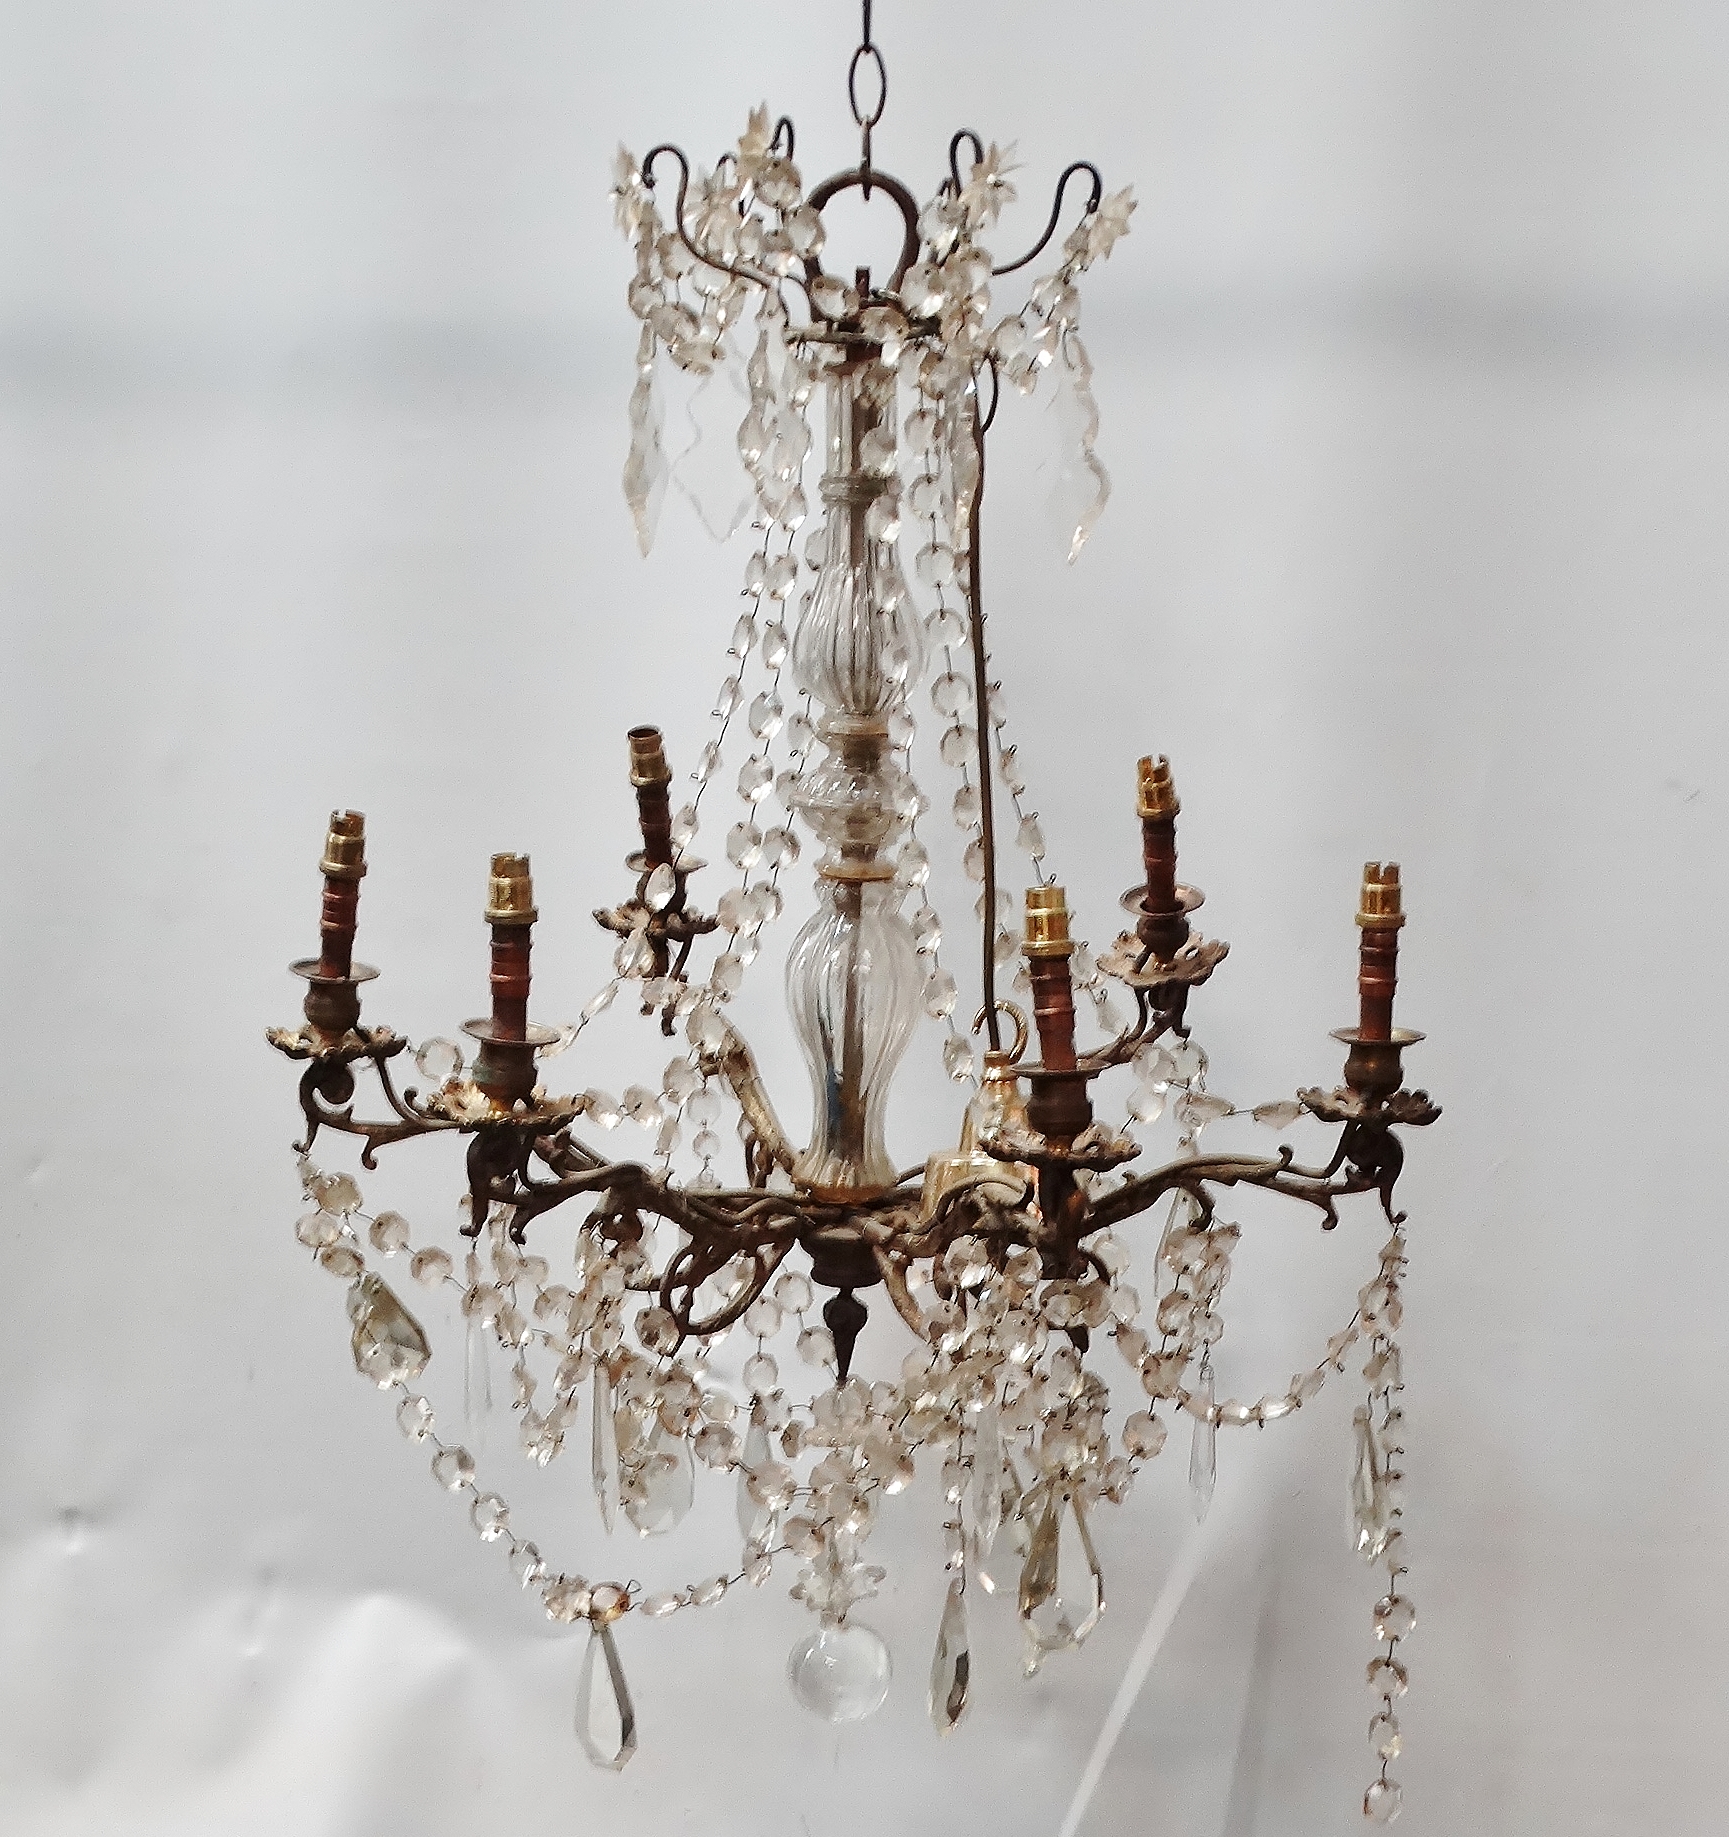 French Chandelier - An early 20th century six branch ceiling electrolier with glass droplet